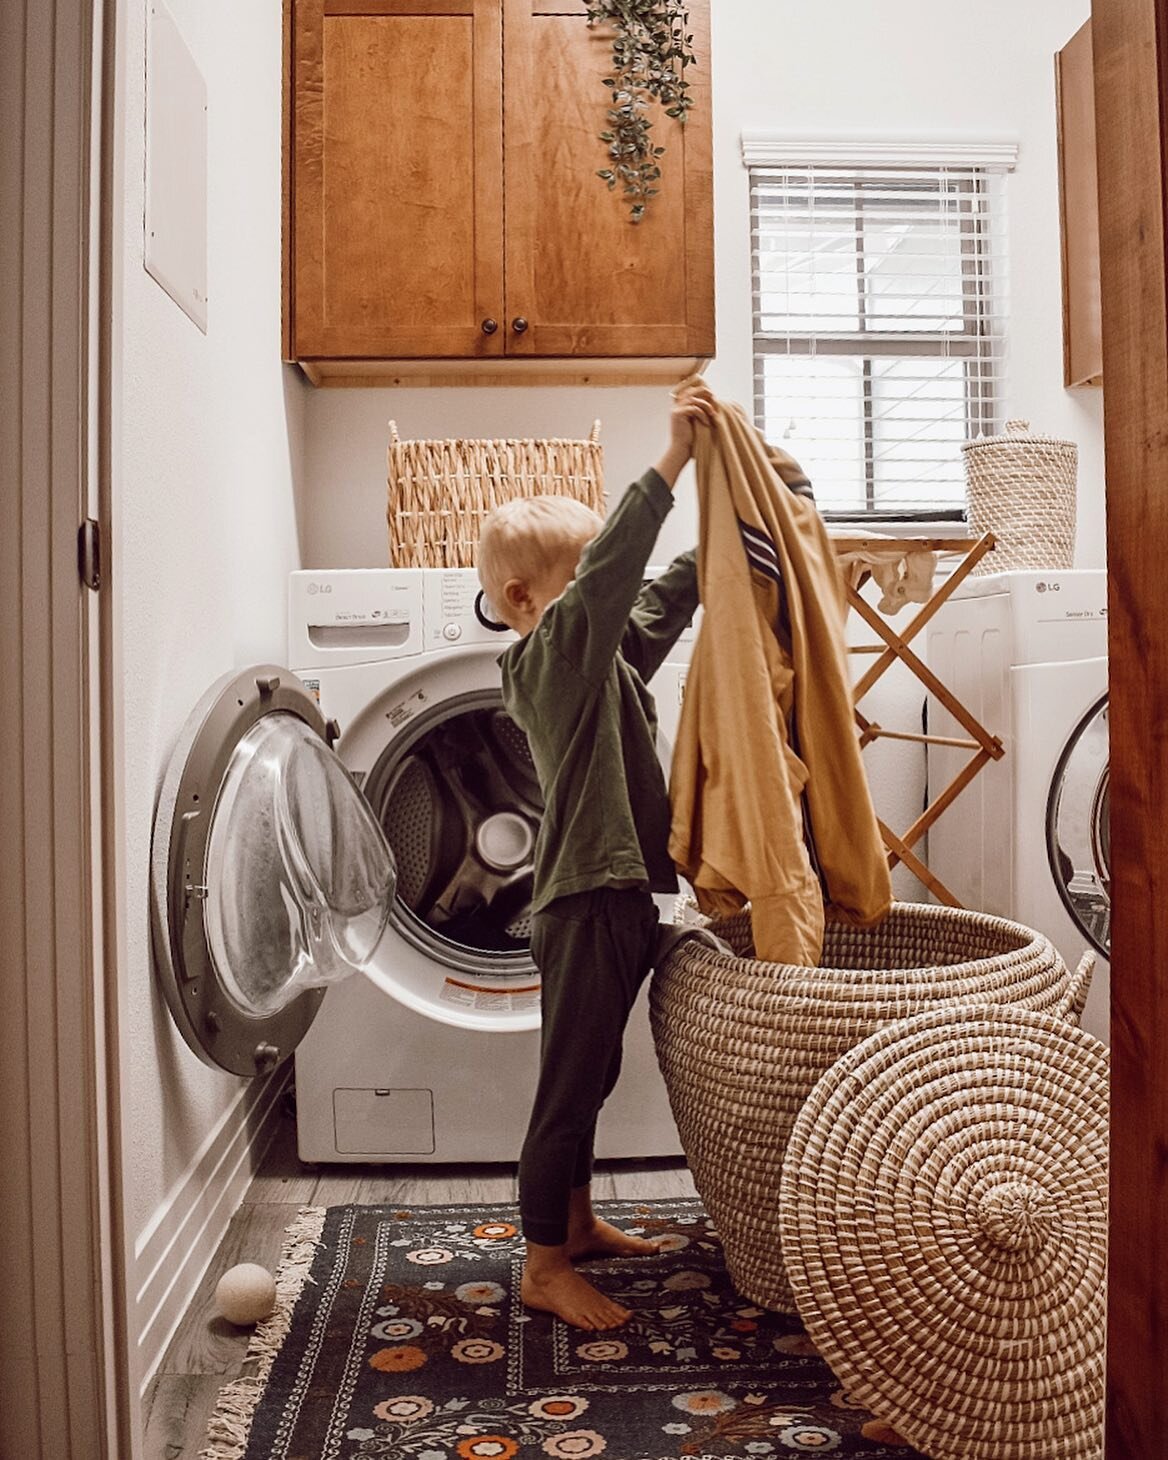 One load a day. Every day. That&rsquo;s how I keep my head from spinning. Laundry used to be such an enemy of mine. For the longest time we lived in places with the oldest washing machines and always had issues! One time our dryer started to eat our 